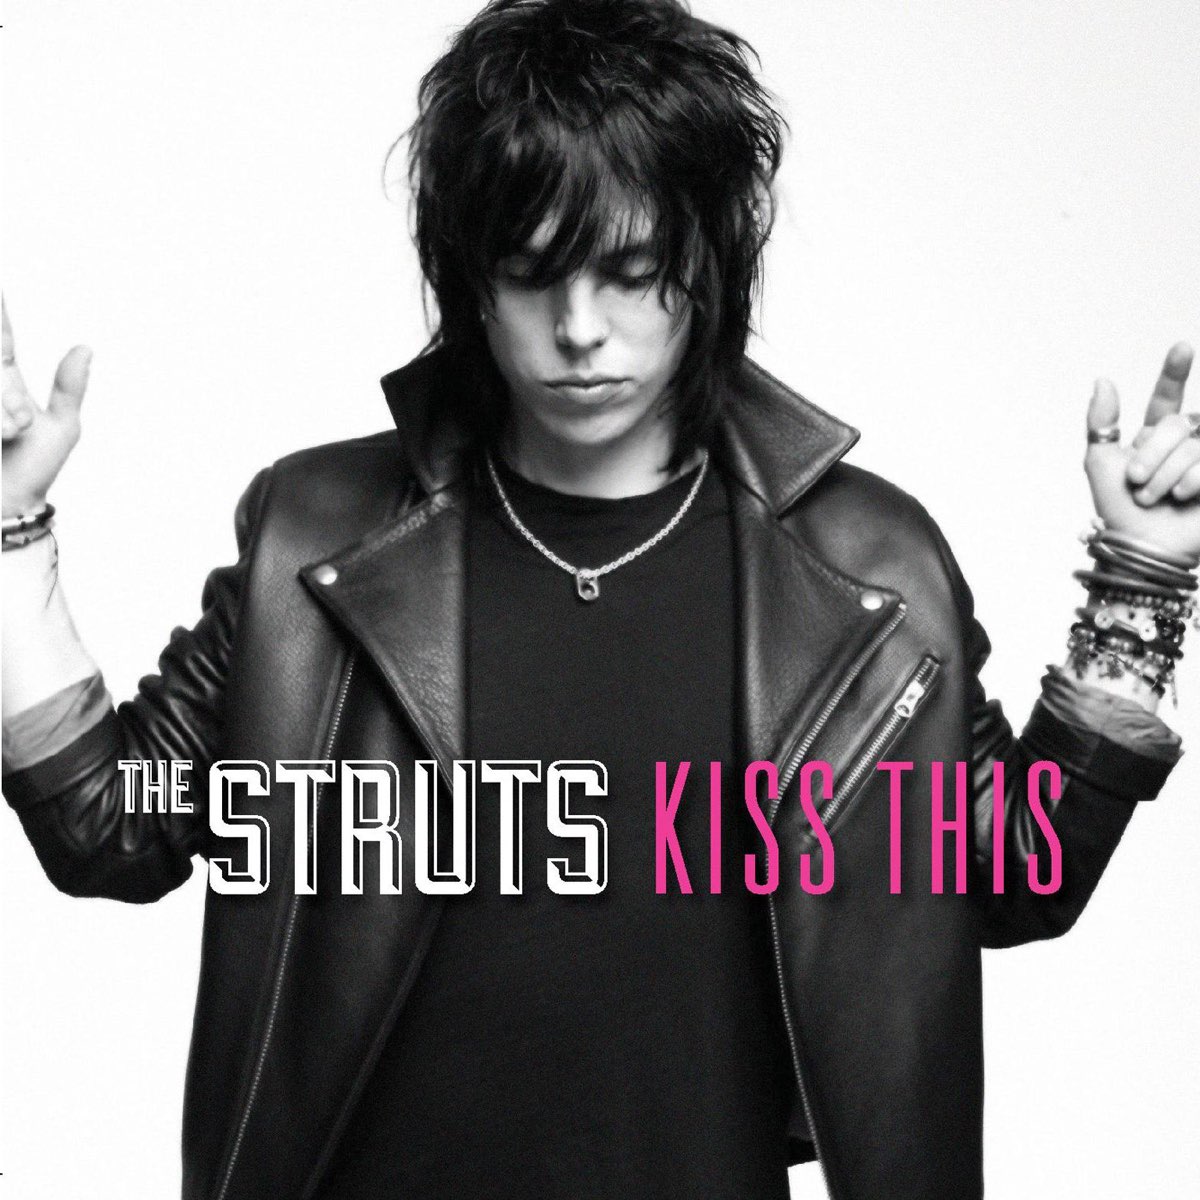 The Struts Kiss This EP cover artwork